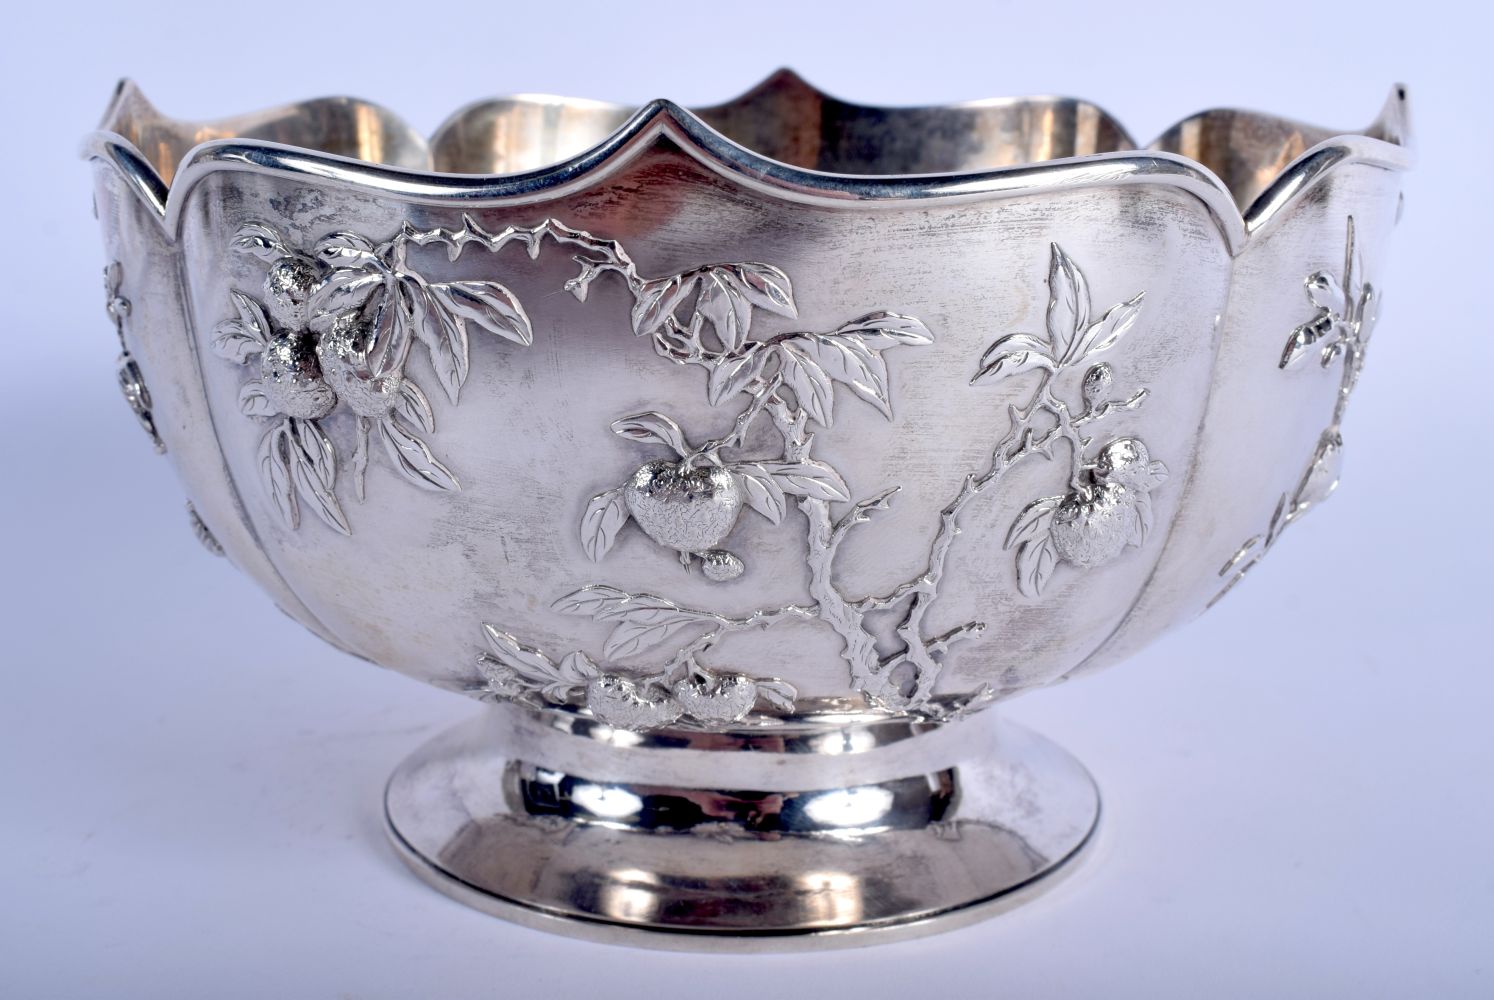 A LATE 19TH CENTURY CHINESE SCALLOPED SILVER BOWL by Zeewo, decorated with foliage and vines. 558 gr - Image 2 of 9